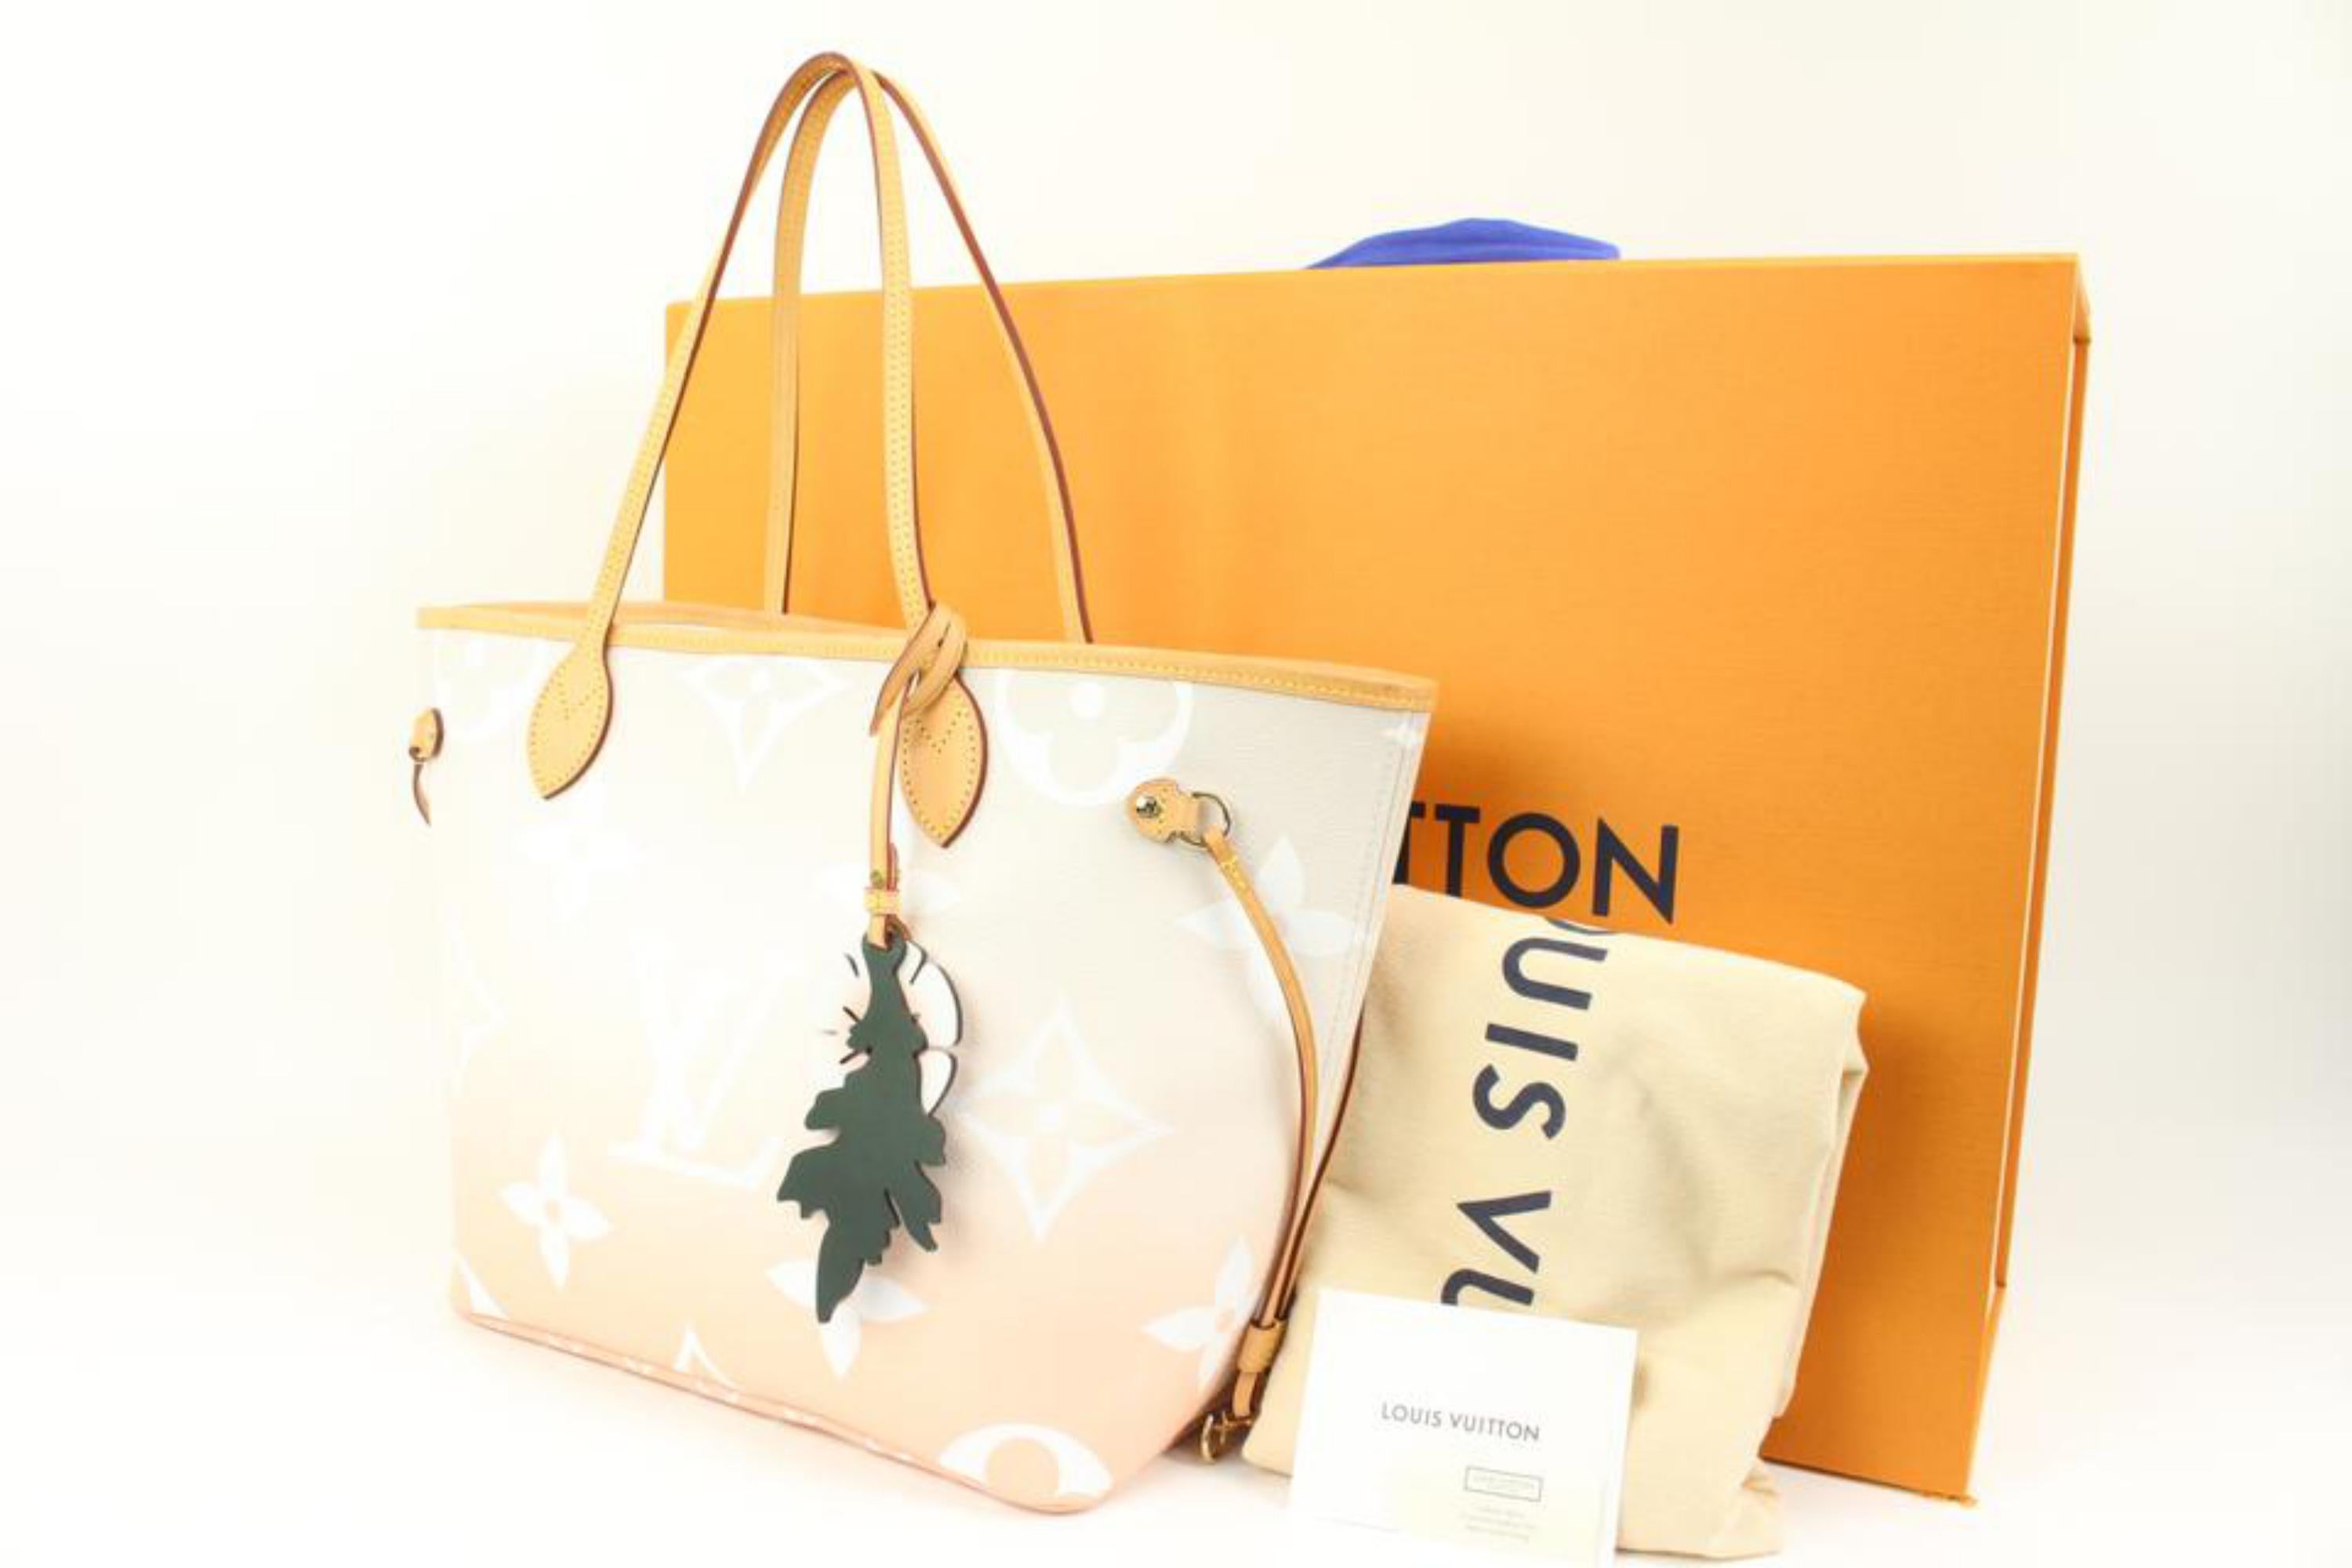 Louis Vuitton Peach Mist By the Pool Neverfull MM Tote Bag 85lk412s
Date Code/Serial Number: LU0221
Made In: France
Measurements: Length:  18